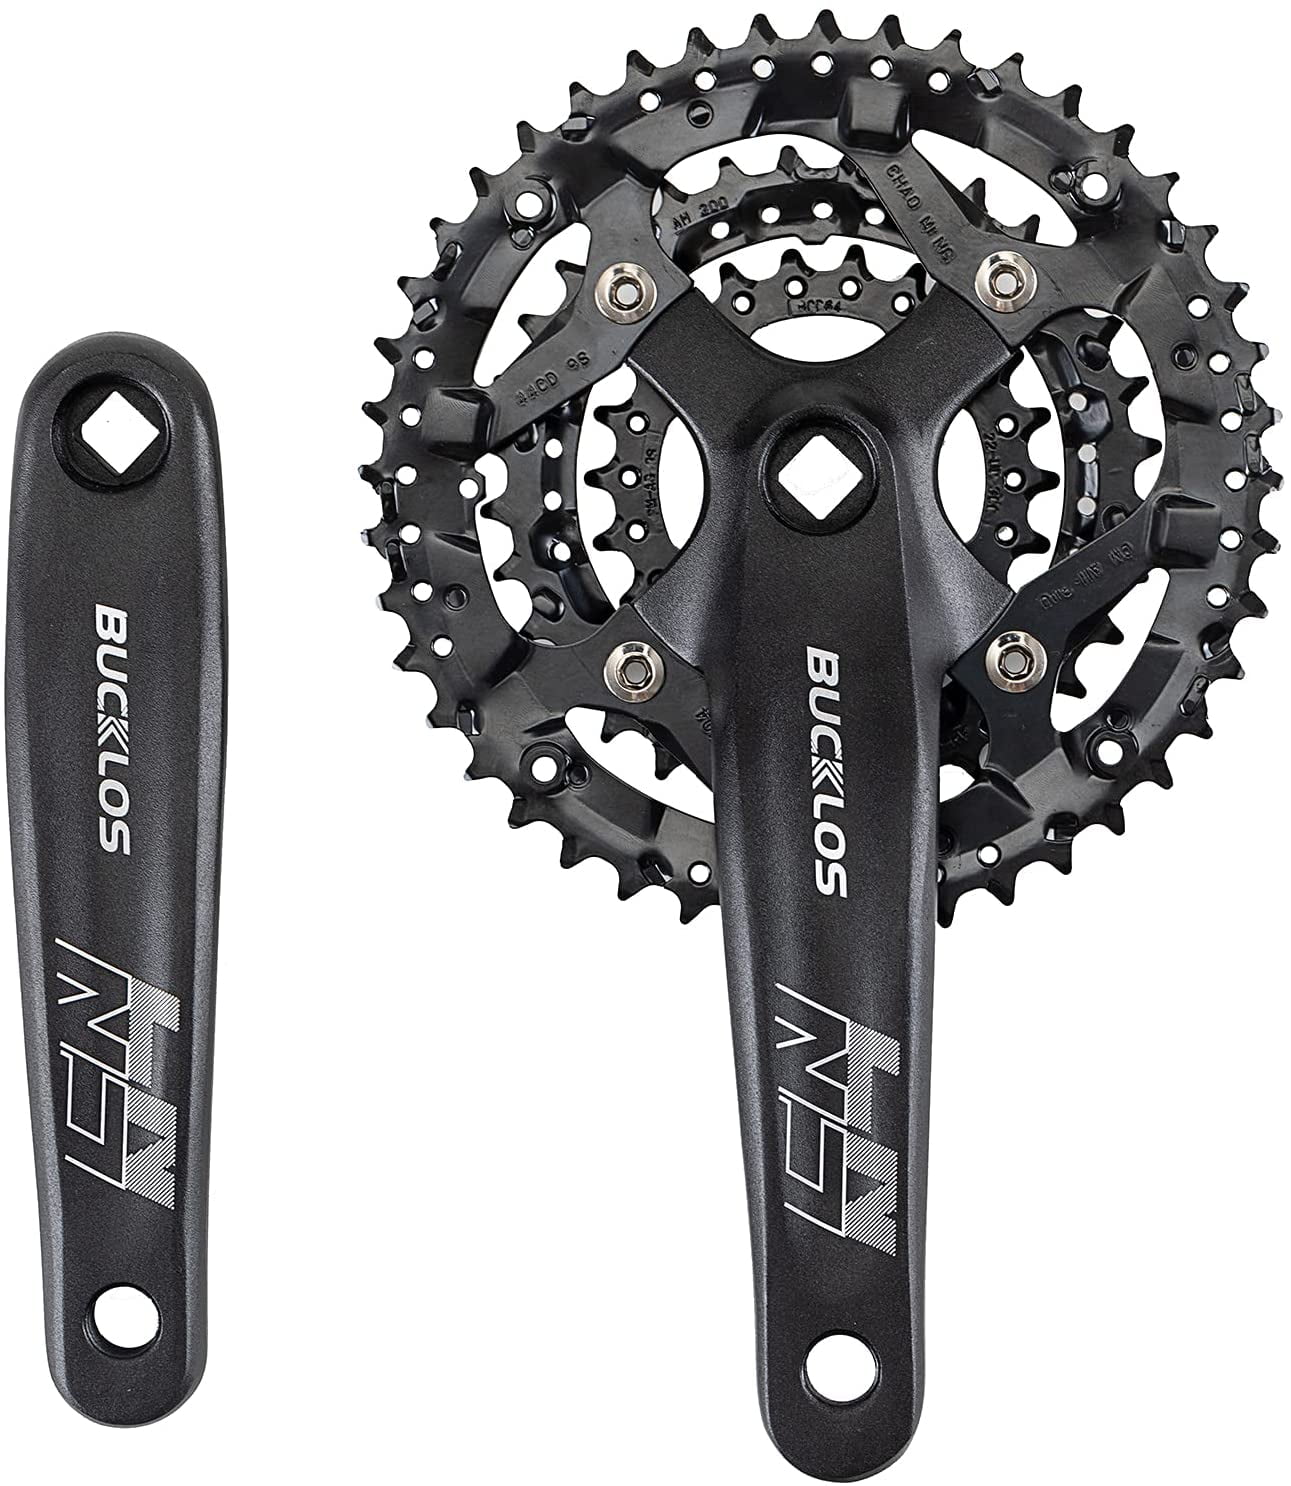 DENPETEC MTB 170mm Square Taper Crankset with 30T 32T 34T 36T 38T Narrow Wide Tooth Chainring Mountain Bike Single Speed Crankset Replacement for Bicycle Crank Arm Set